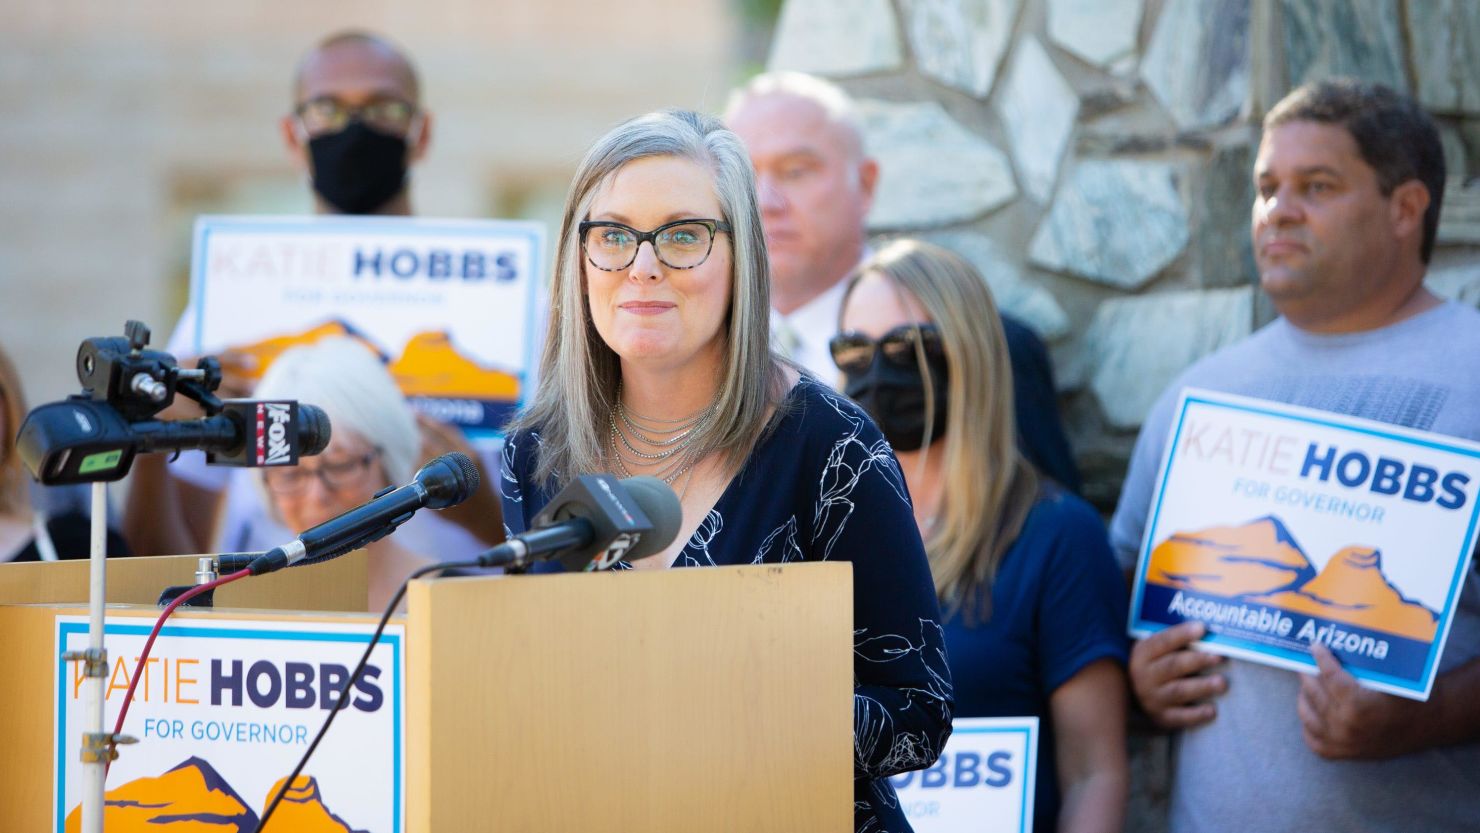 Arizona Secretary of State Katie Hobbs, who's running for the Democratic nomination for governor, speaks at a press conference on November 4, 2021.